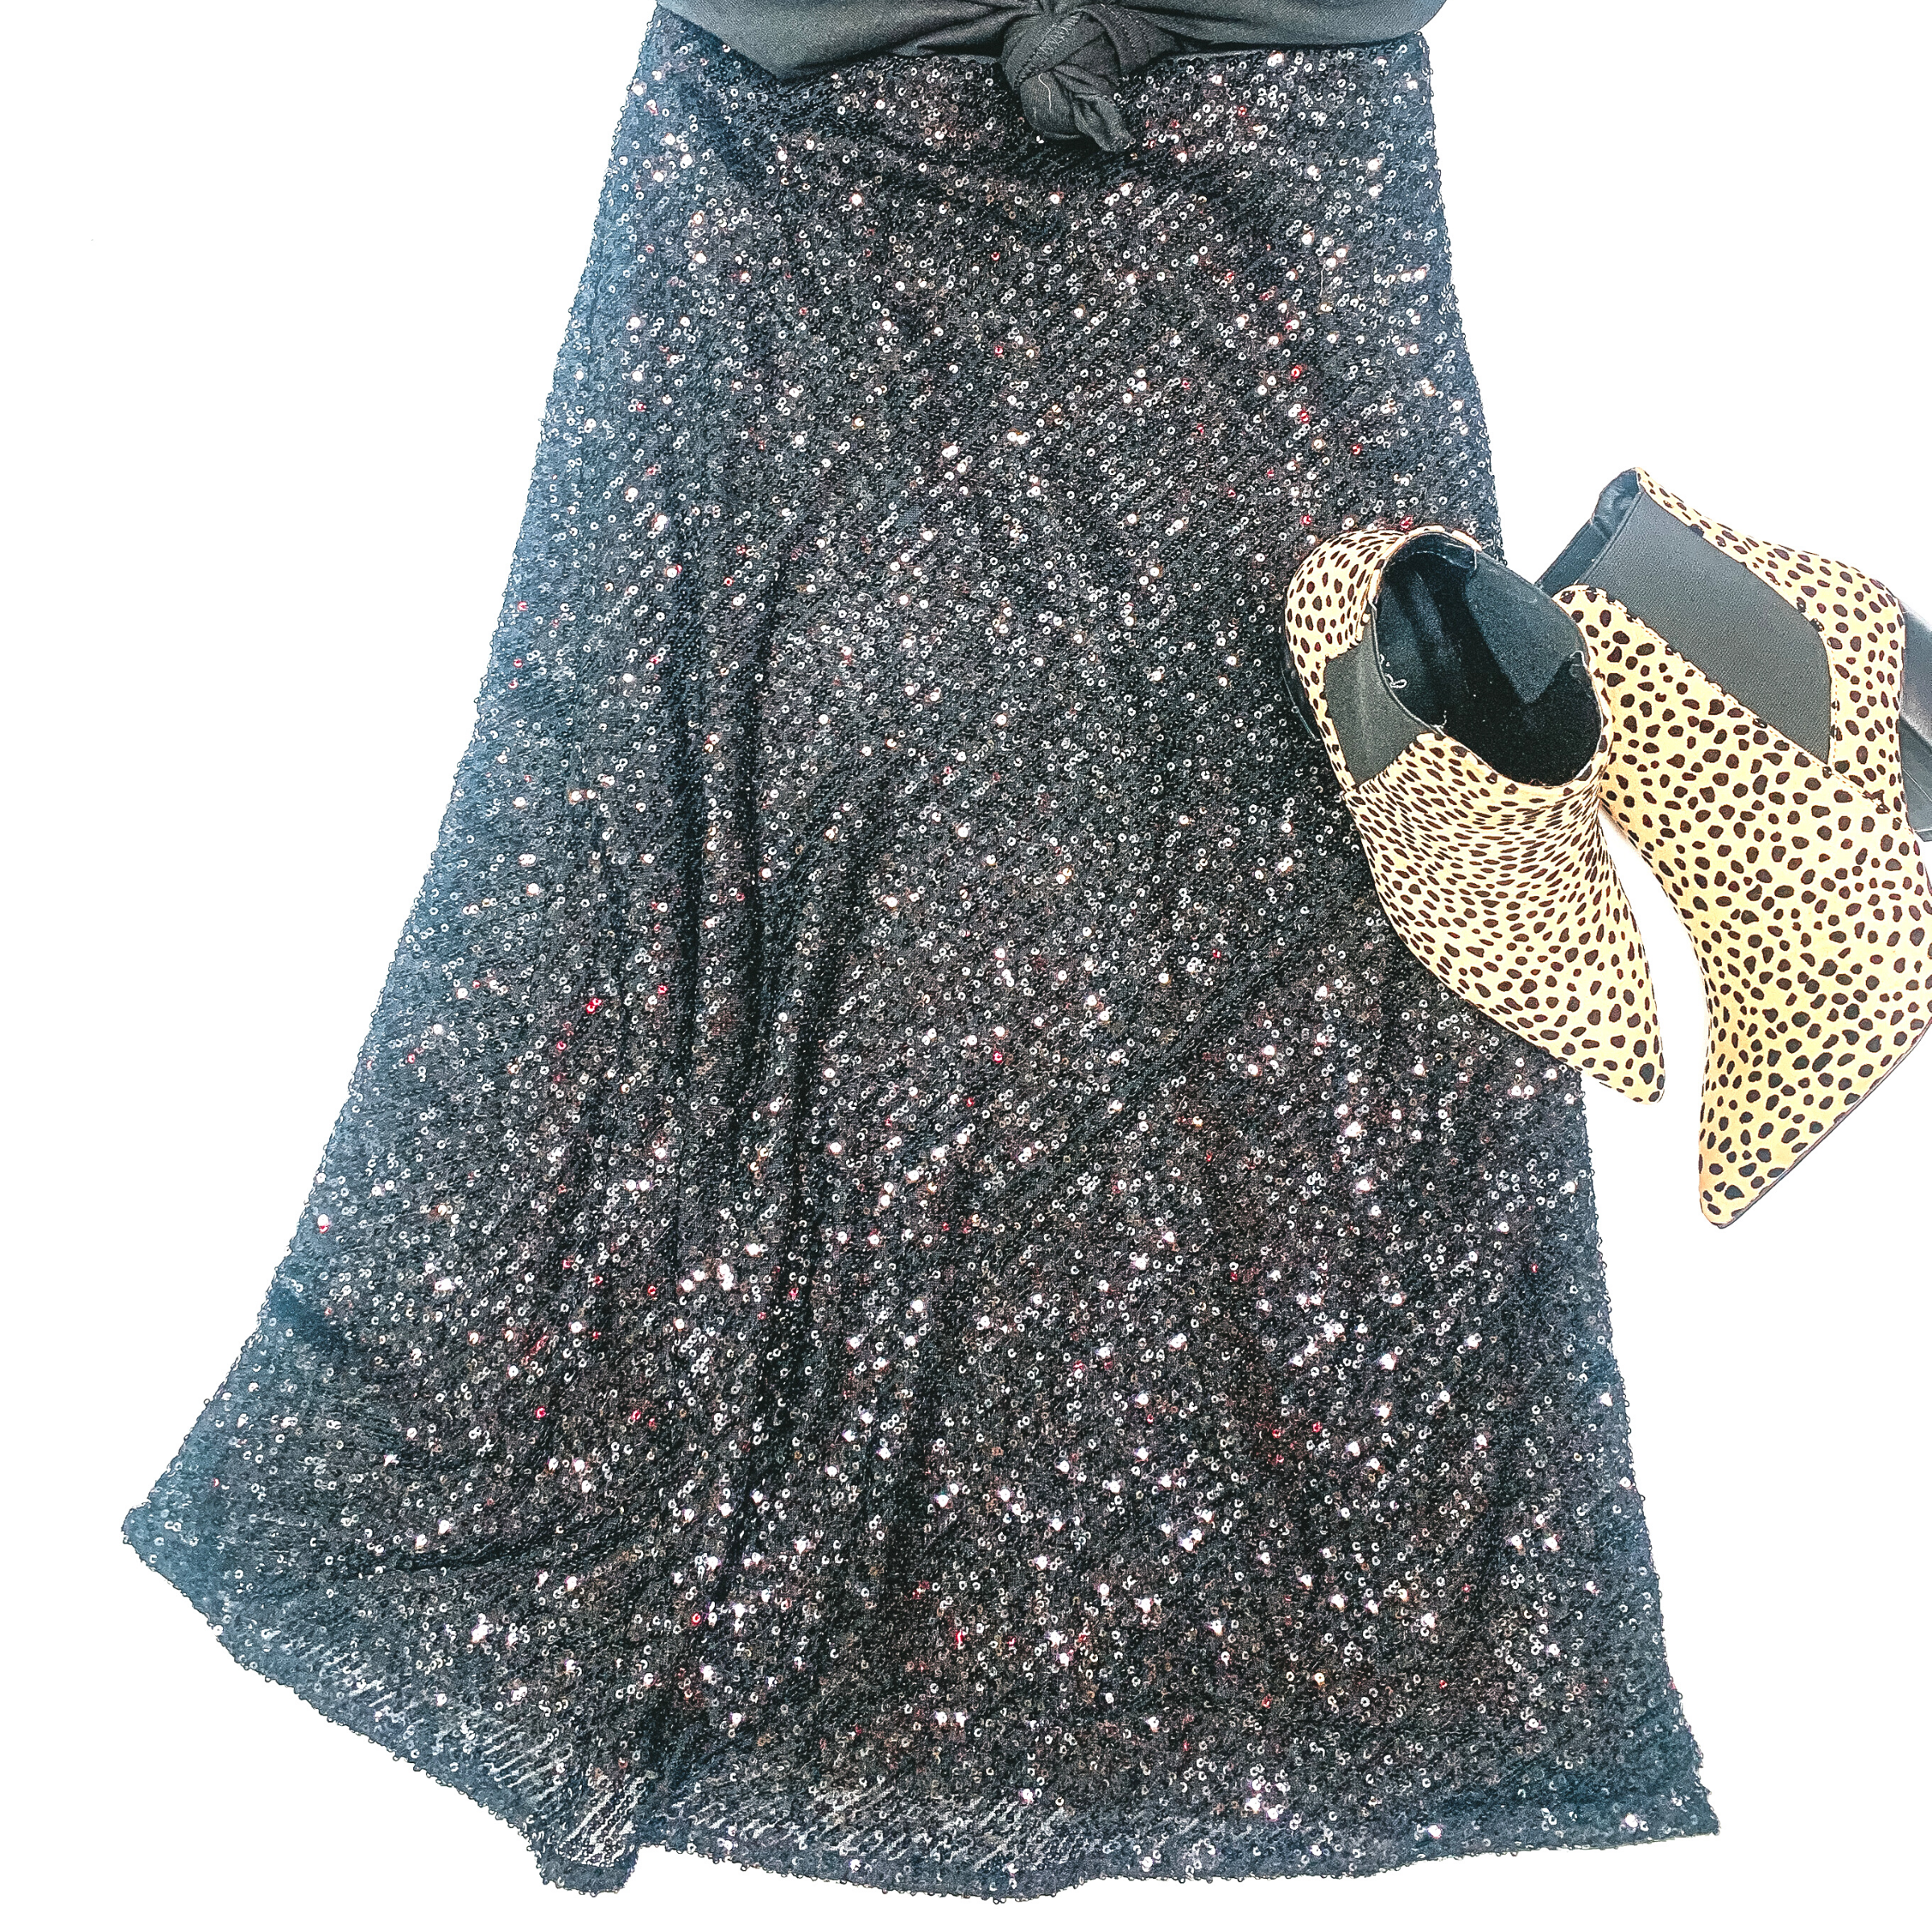 Beating Expectations Solid Sequin Midi Skirt in Black - Giddy Up Glamour Boutique